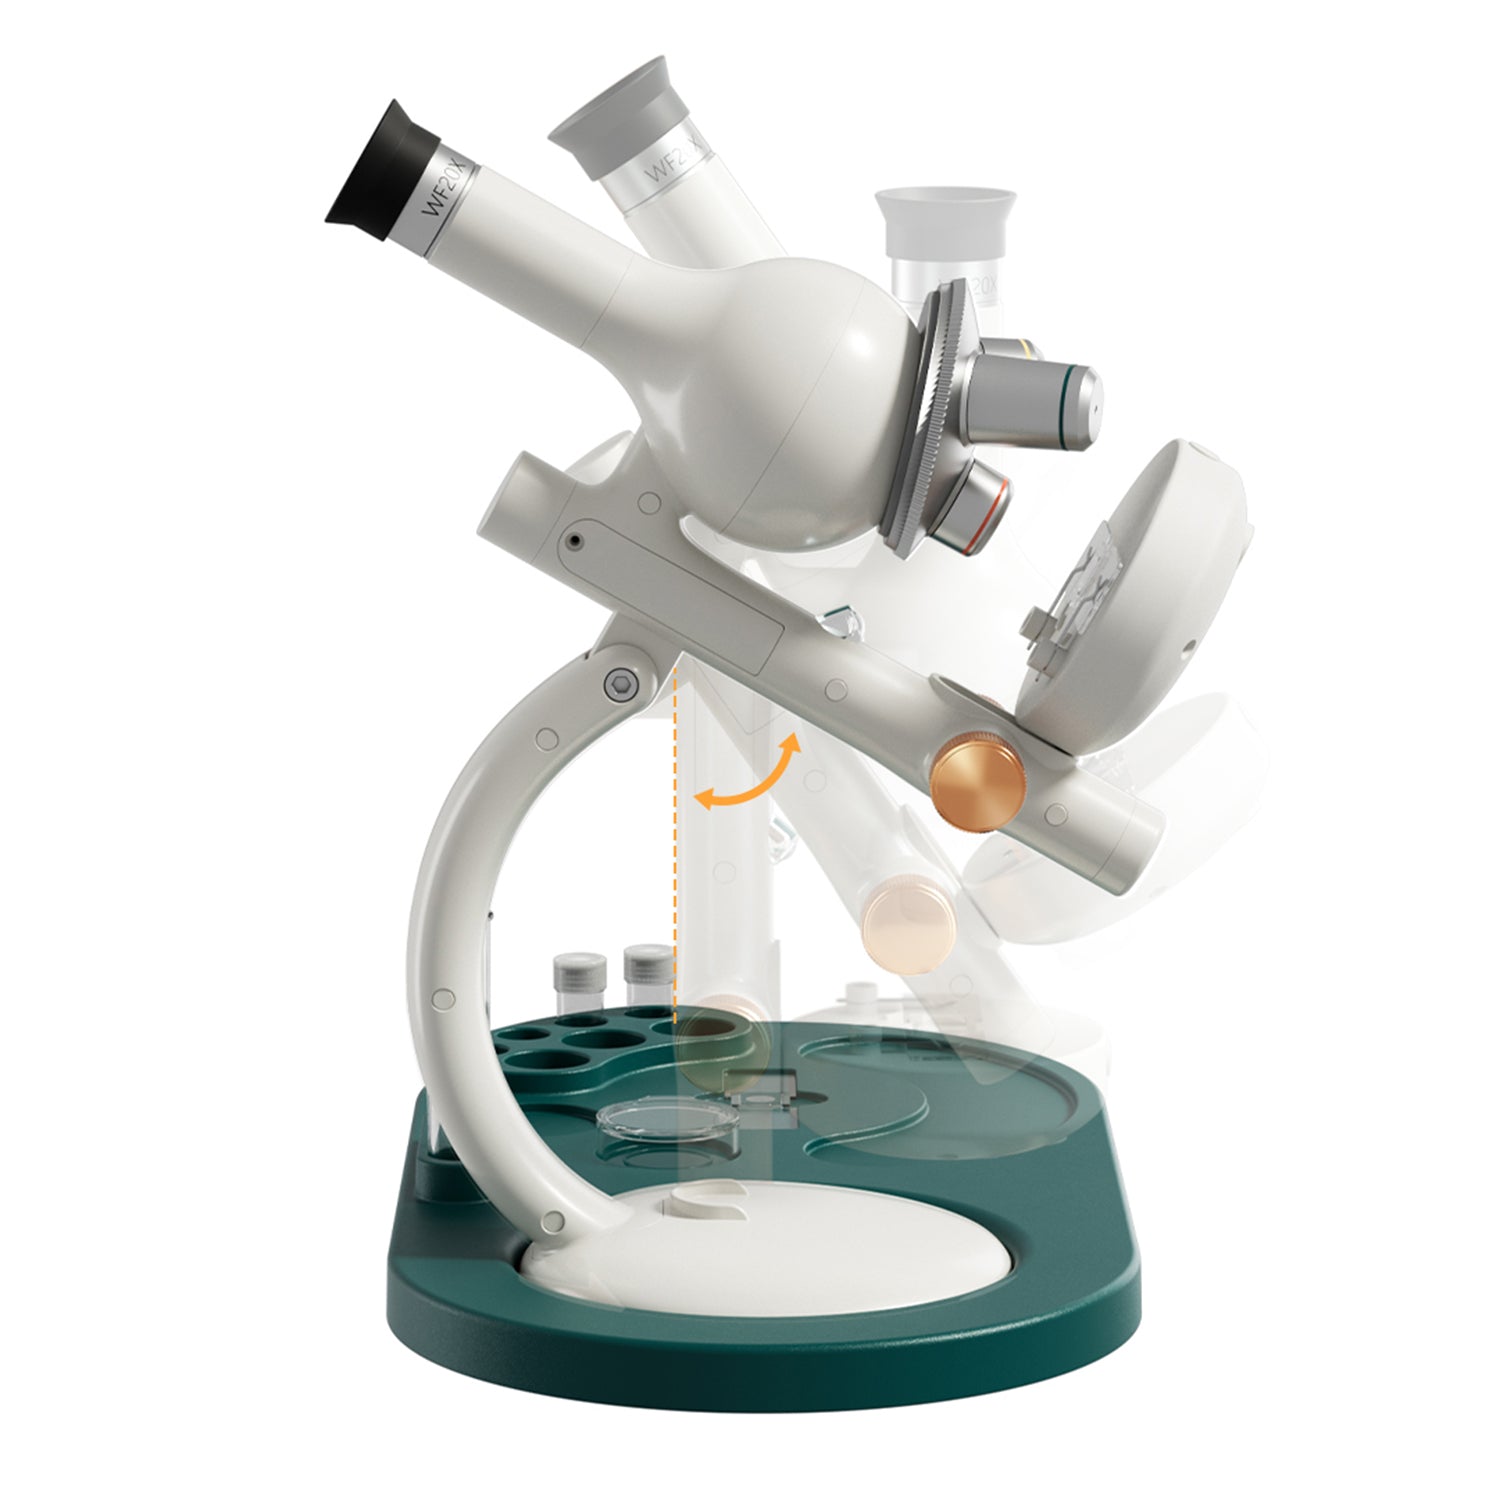 The ergonomic design of the microscope allows children to make their observations while sitting or standing.